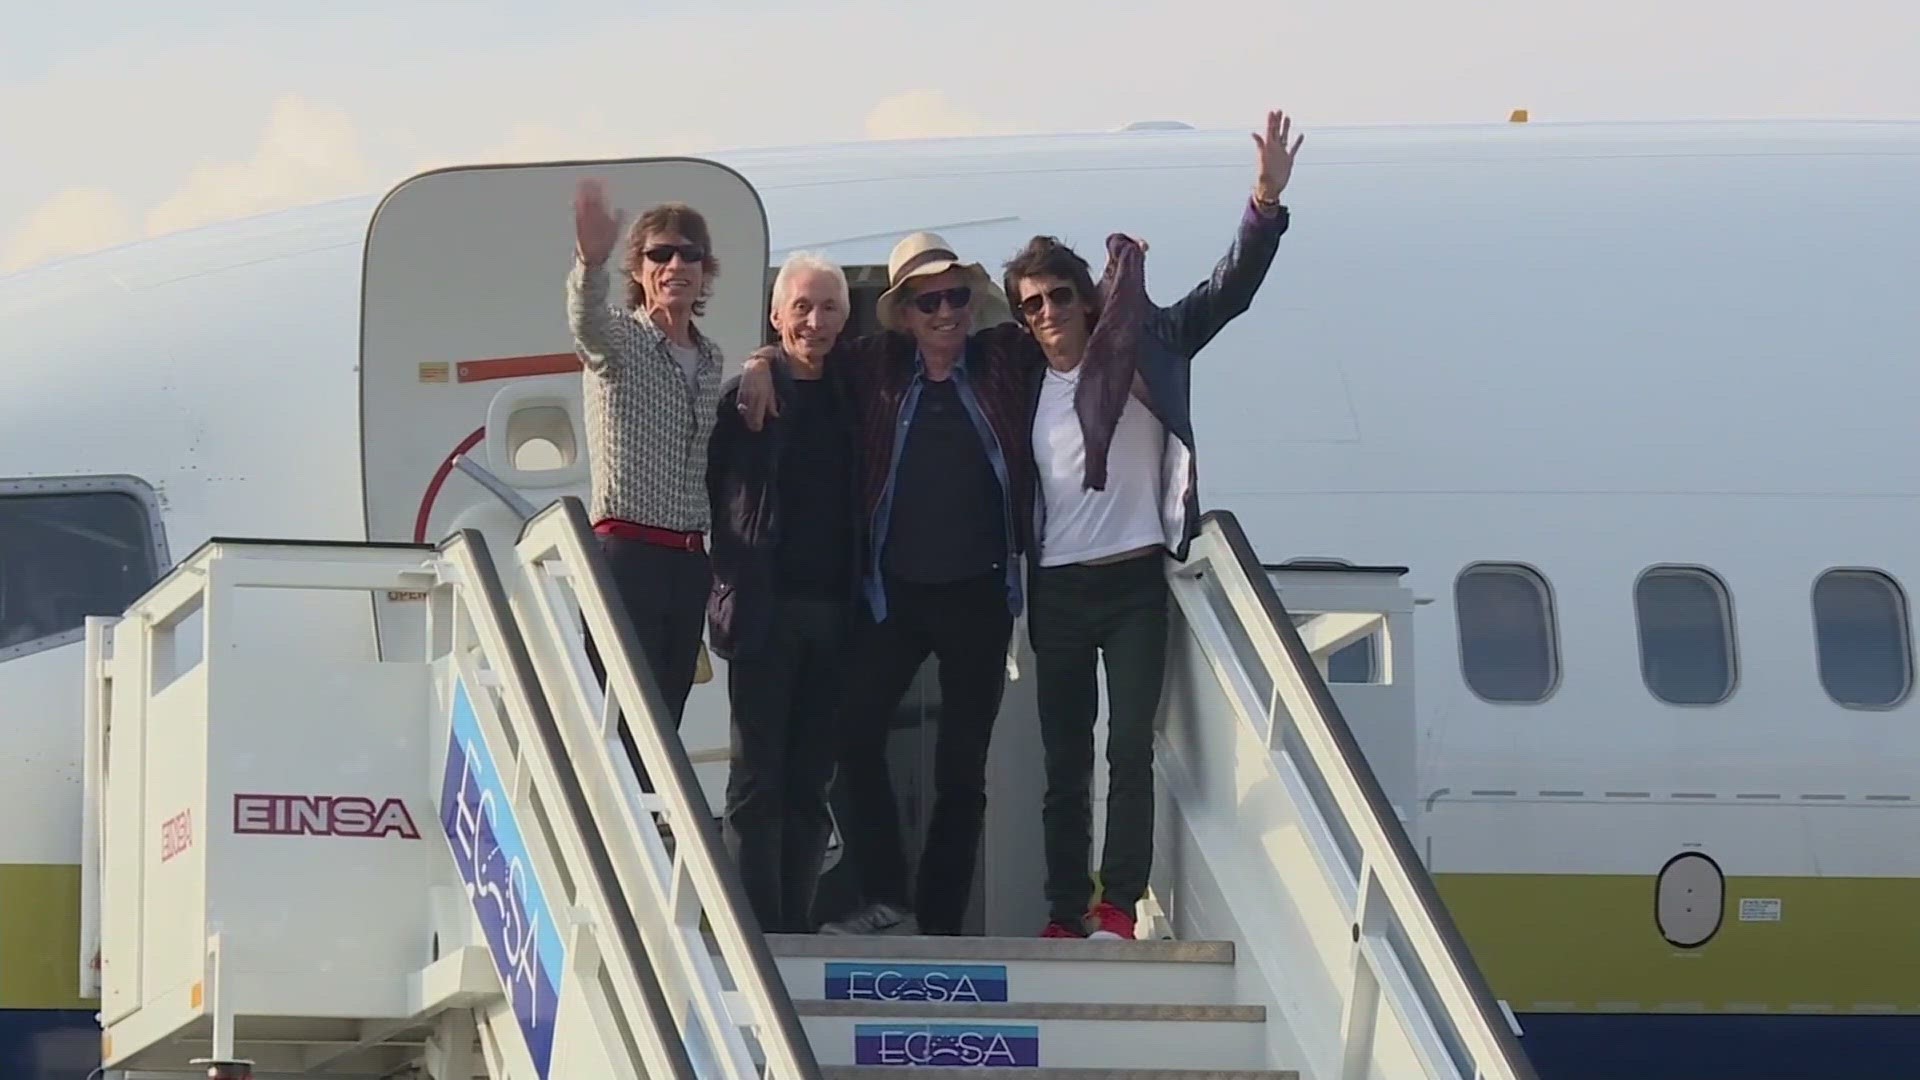 The Rolling Stones announced Tuesday they are heading back on the road with a new tour performing in 16 cities across the United States and Canada.